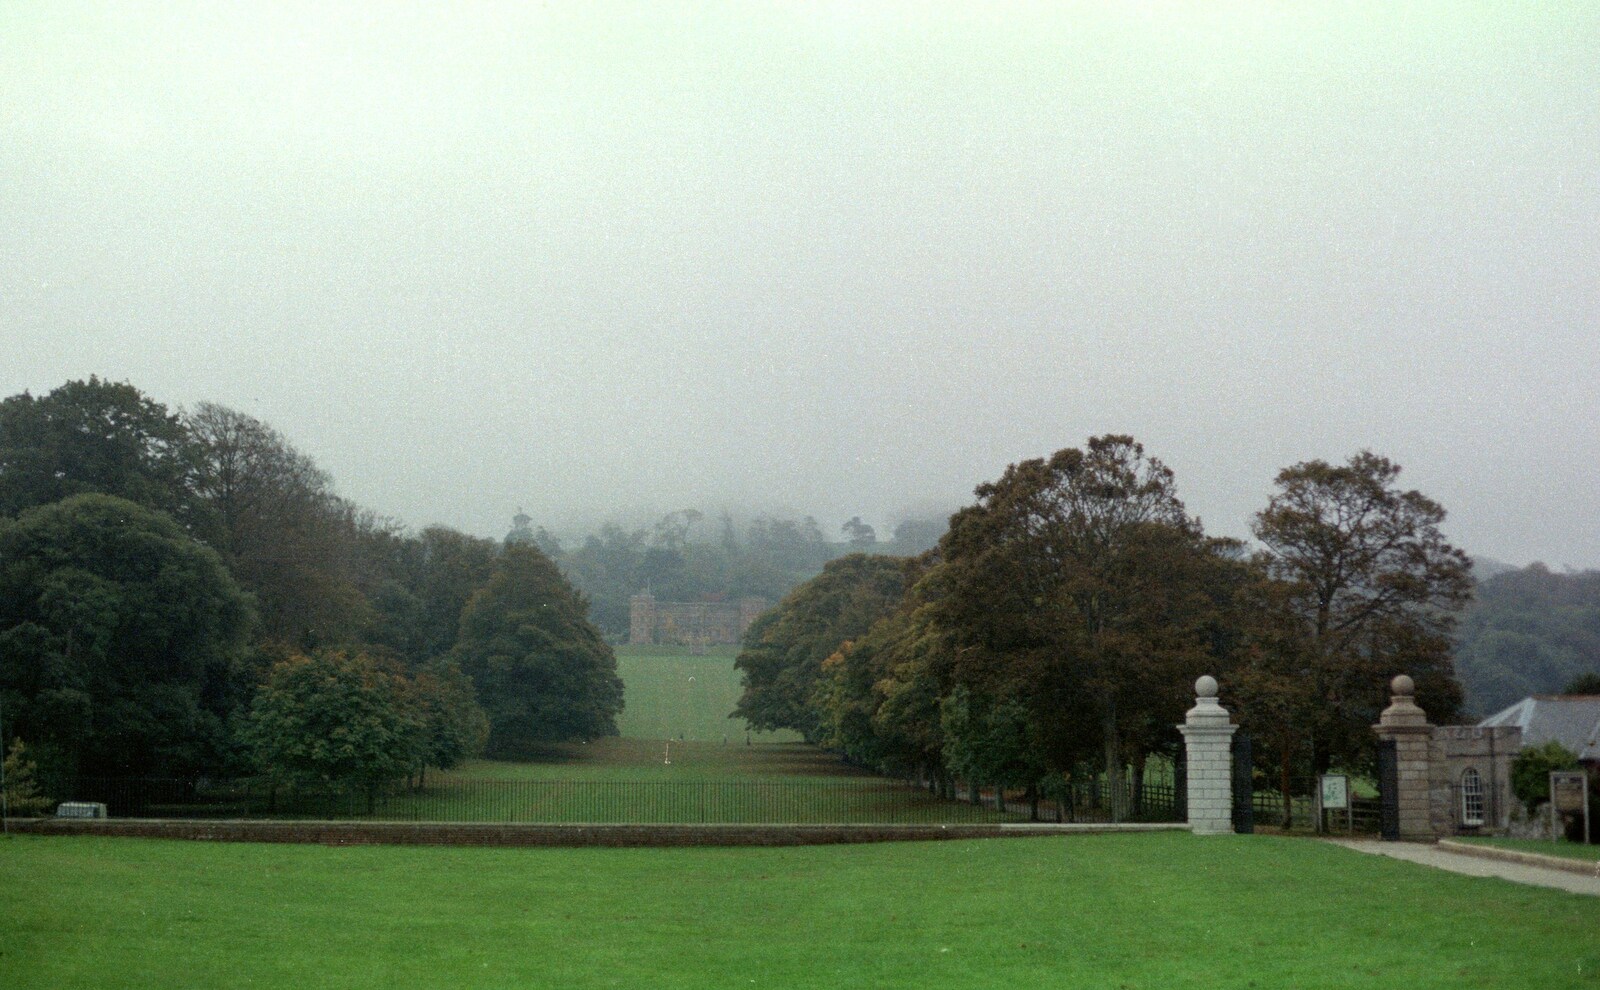 Mount Edgcumbe House from A Trip to Trotsky's Mount, Dartmoor, Devon - 20th March 1987